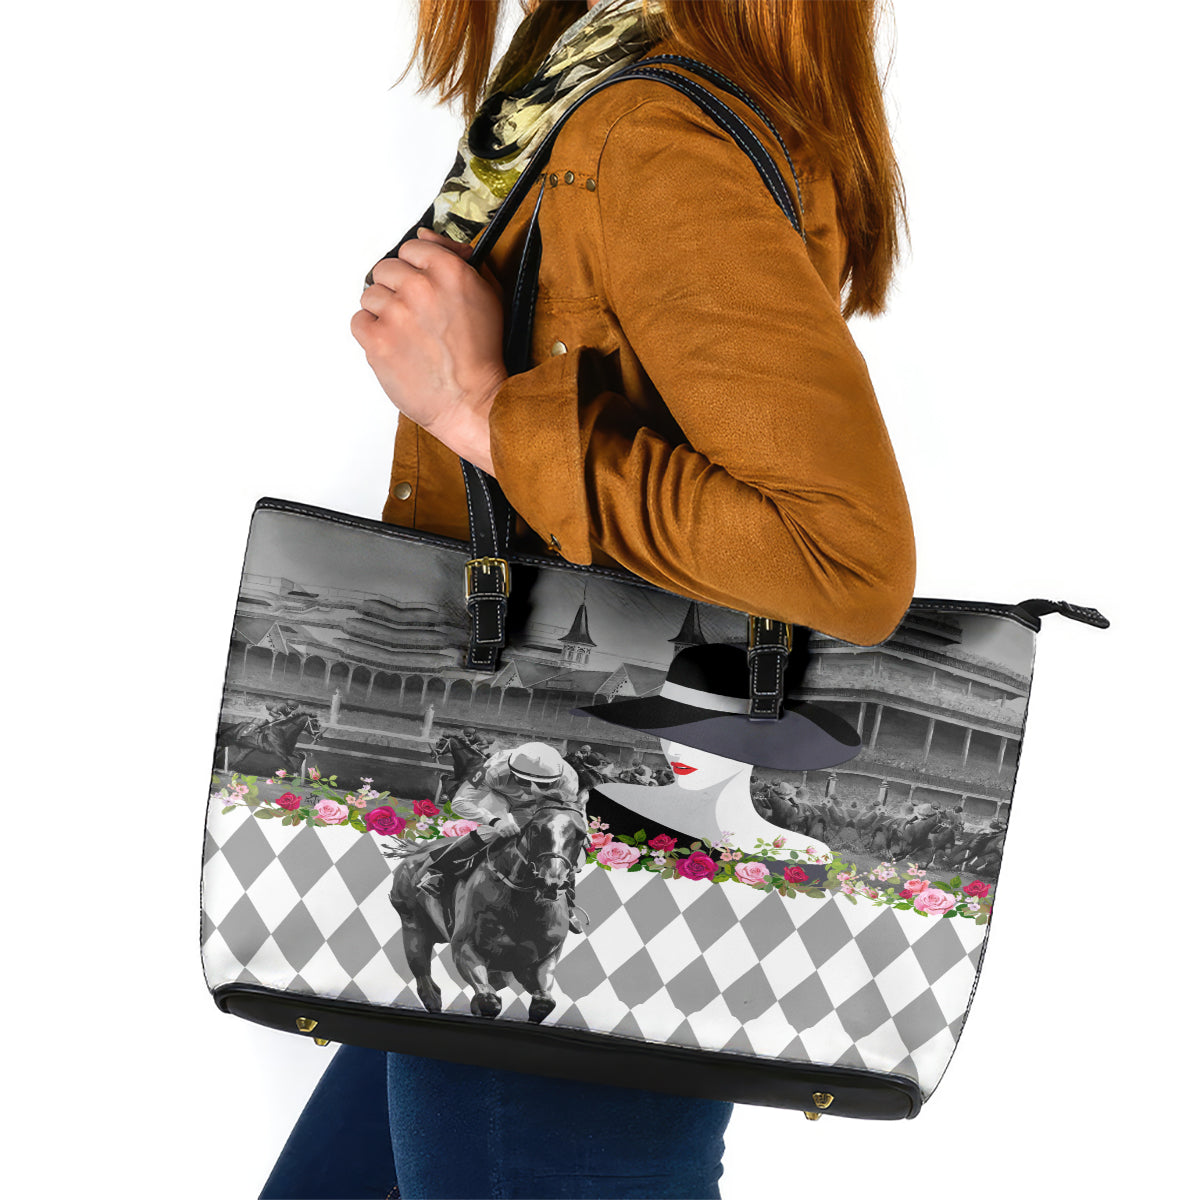 Kentucky Racing Horses Derby Hat Lady Leather Tote Bag Churchill Downs and Roses Grayscale